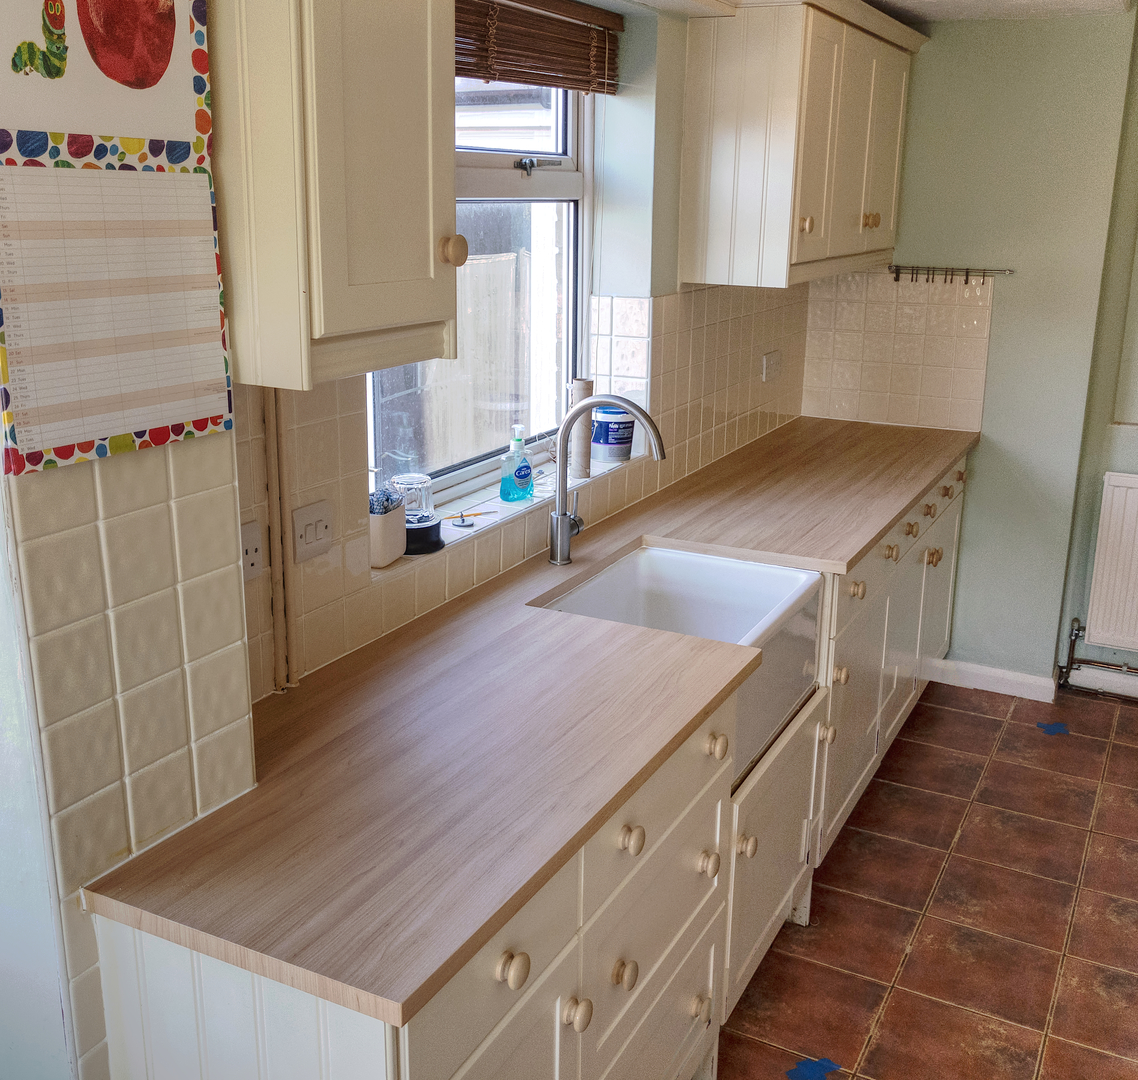 worktop wrap - Coverstyl b3 - Before & After